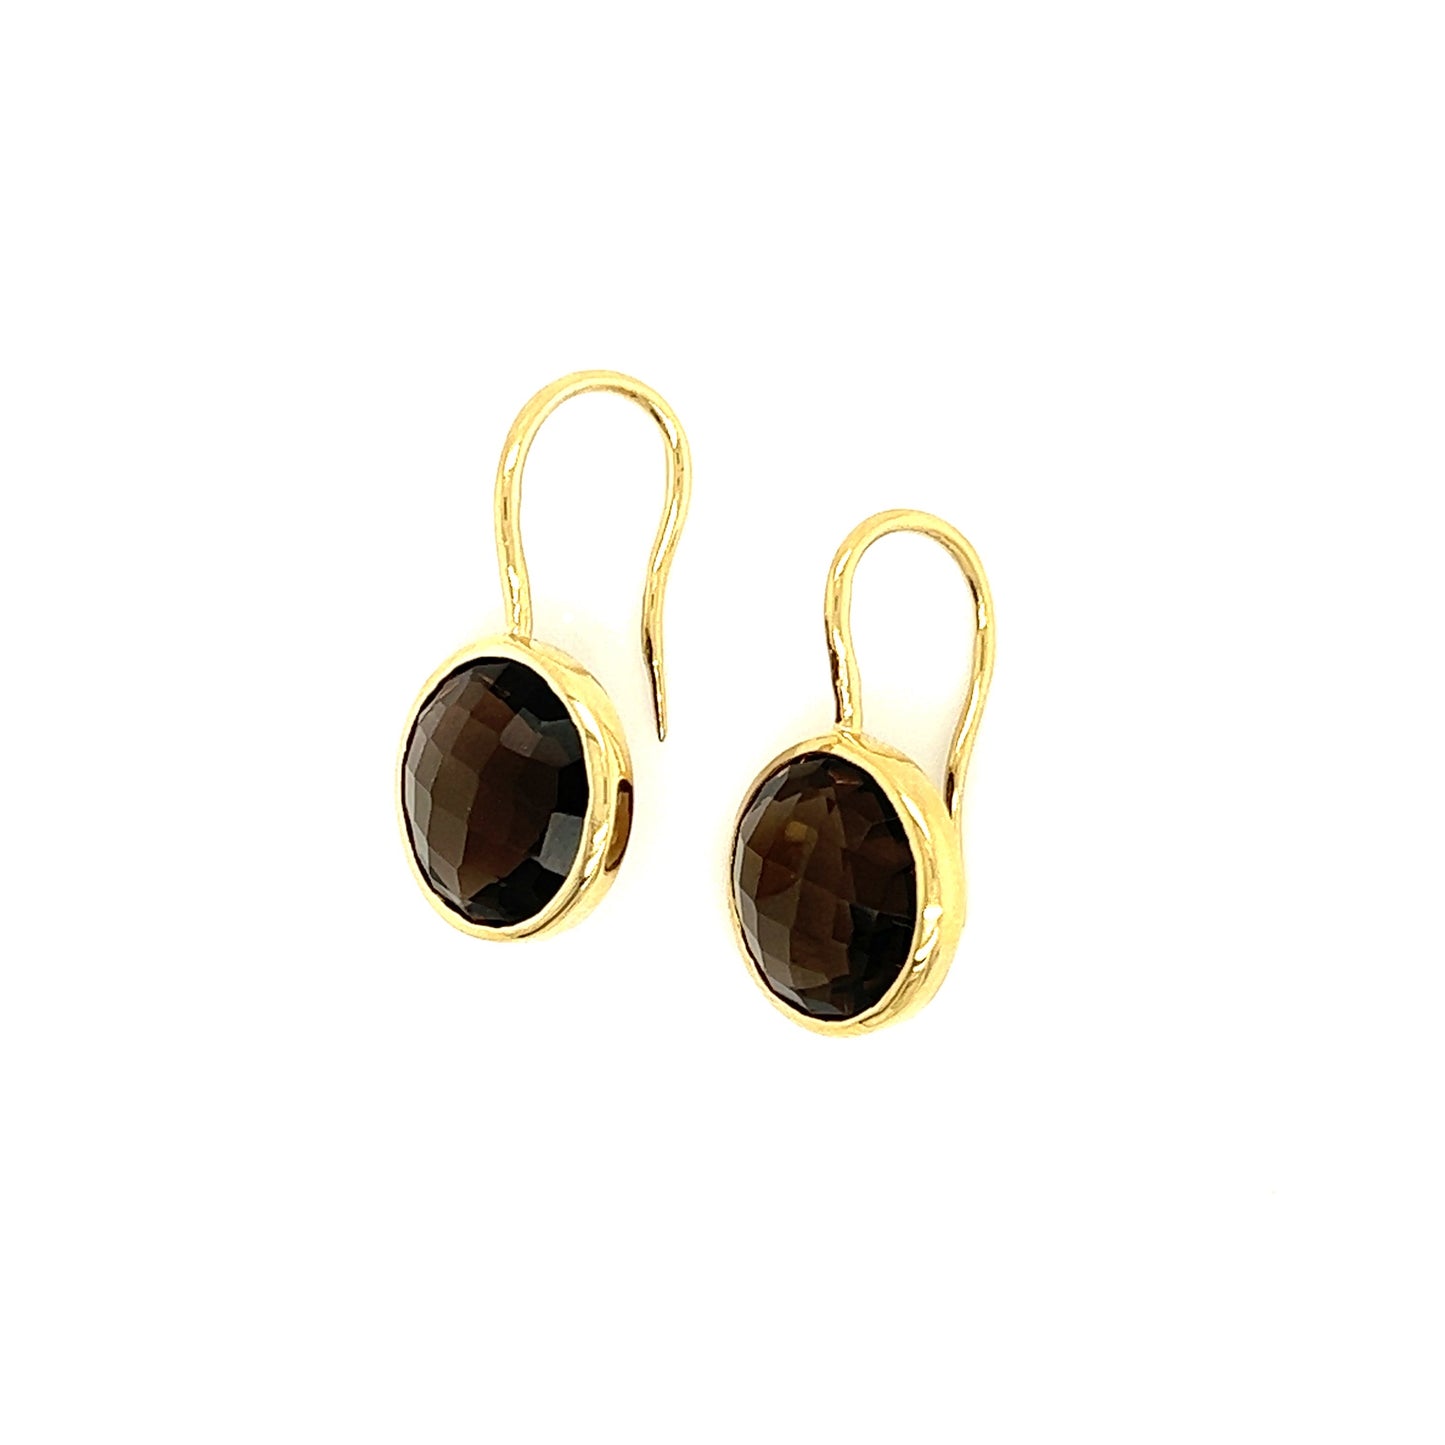 Smoky Quartz Dangle Earrings with French Wires in 14K Yellow Gold Top Right Side View